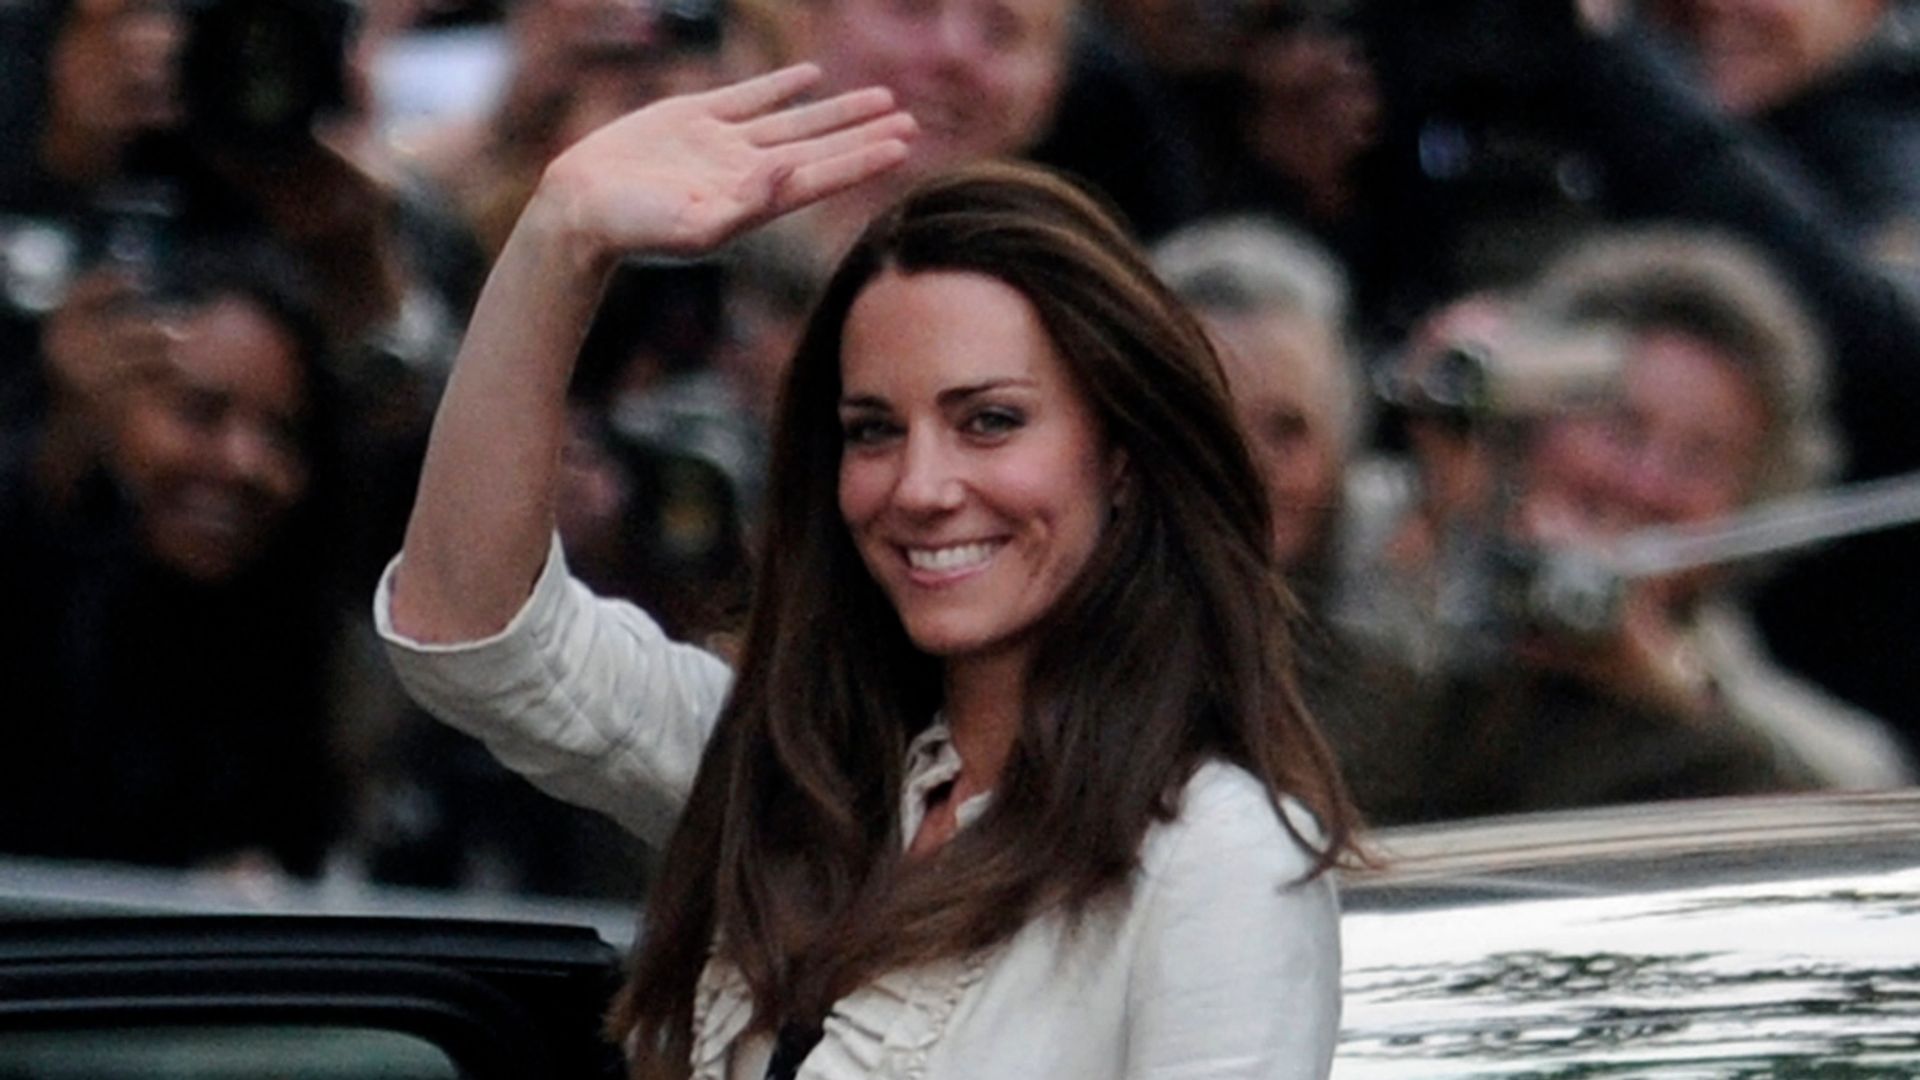 Princess Kate's pre-wedding dress is still one of her best outfits